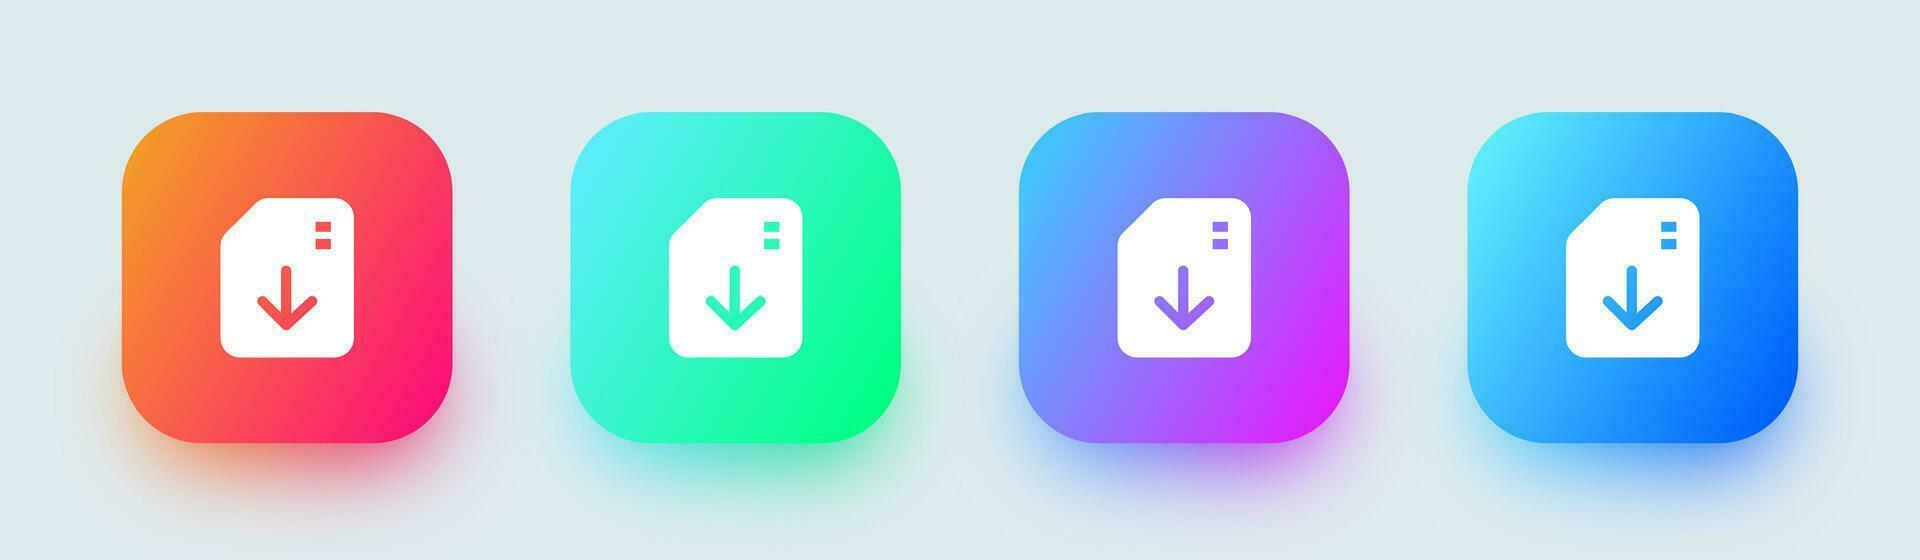 Import solid icon in square gradient colors. Download signs vector illustration.